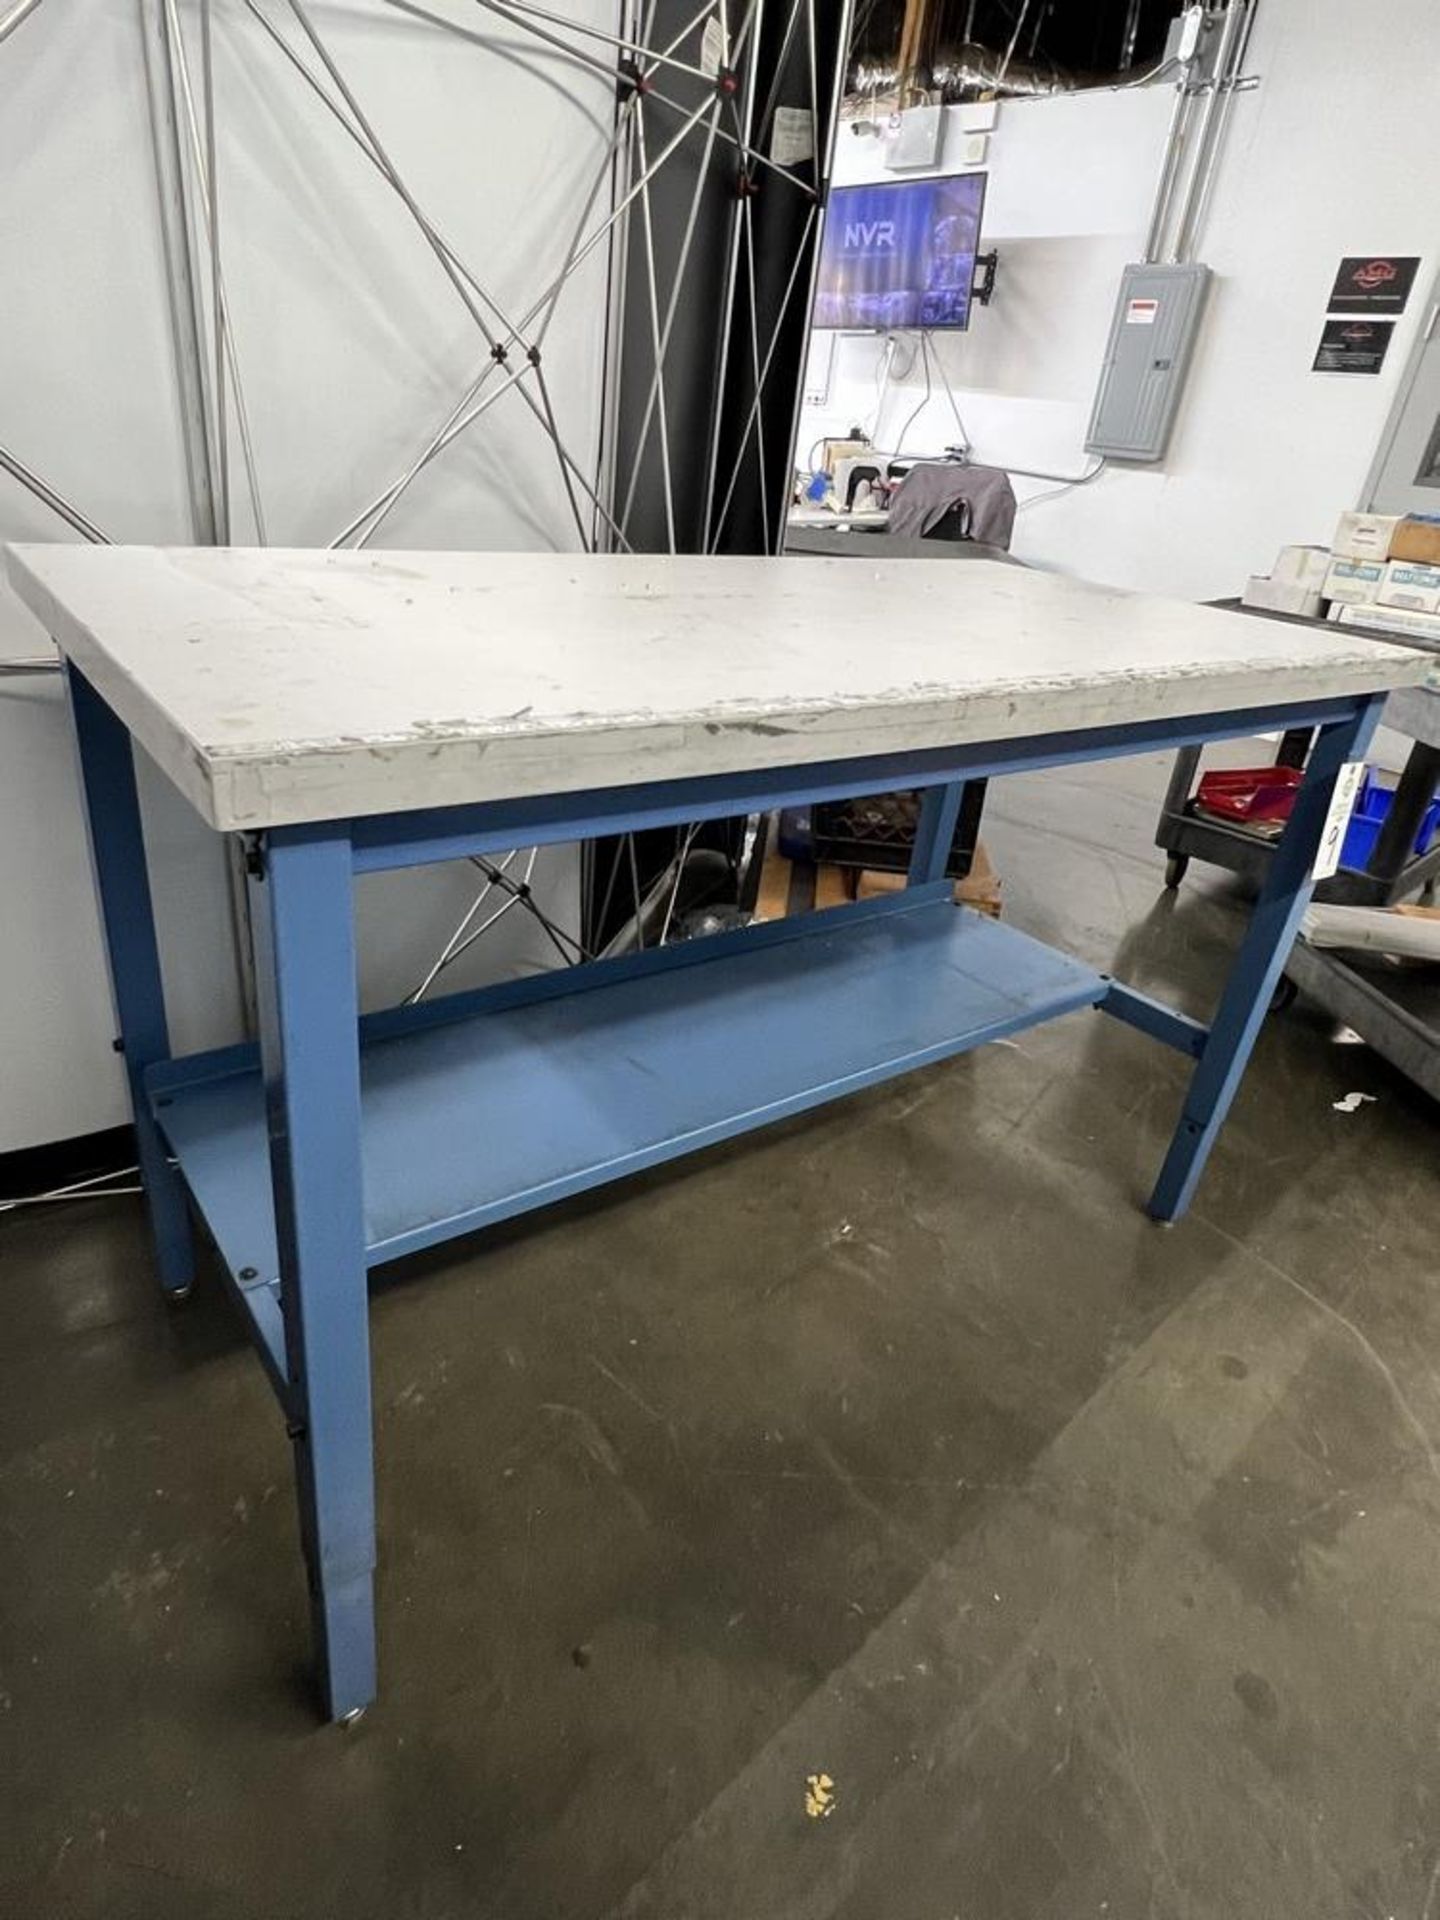 Global Industrial Work Table 5' x 30" x 38" - Image 3 of 3